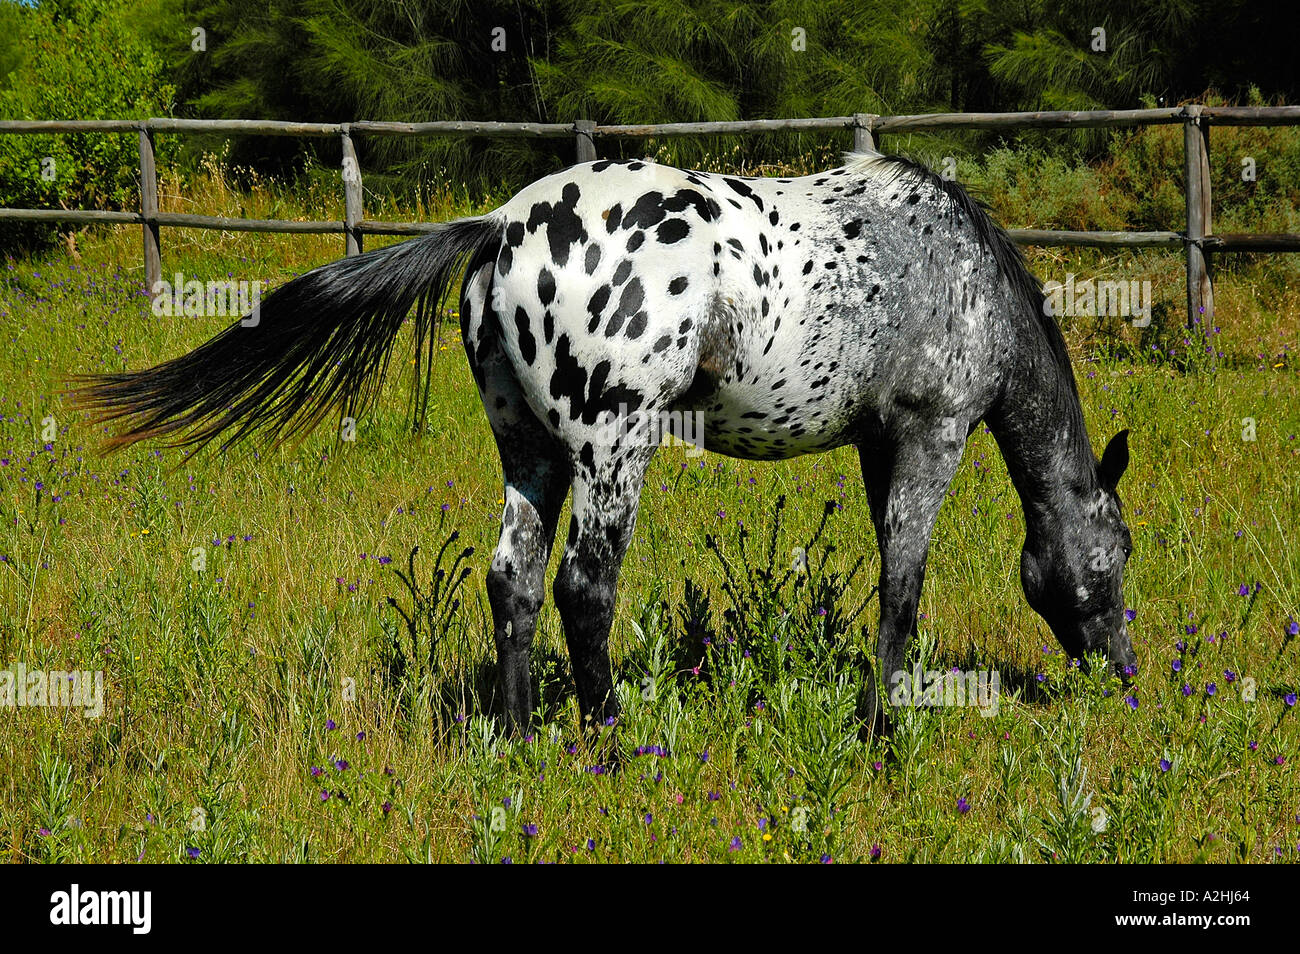 Side view of spotted horse grazing with outstretched tail green grass in background Paarl W Cape South Africa Stock Photo